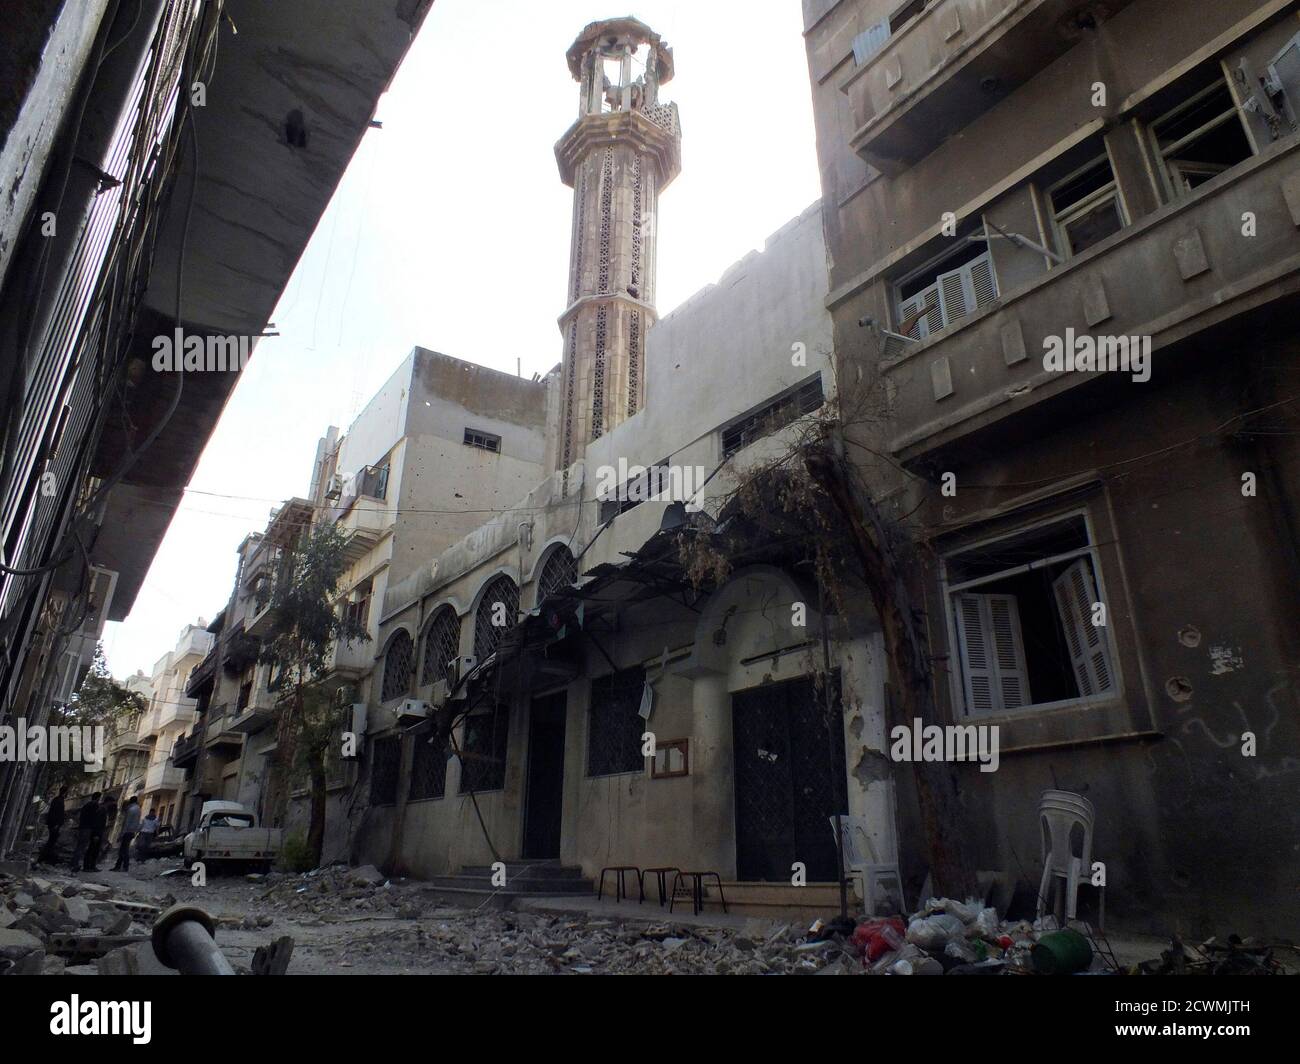 A general view shows a damaged mosque and buildings in Juret al-Shayah in Homs November 1, 2012. Picture taken November 1, 2012.  REUTERS/Yazan Homsy (SYRIA - Tags: CONFLICT POLITICS RELIGION) Stock Photo